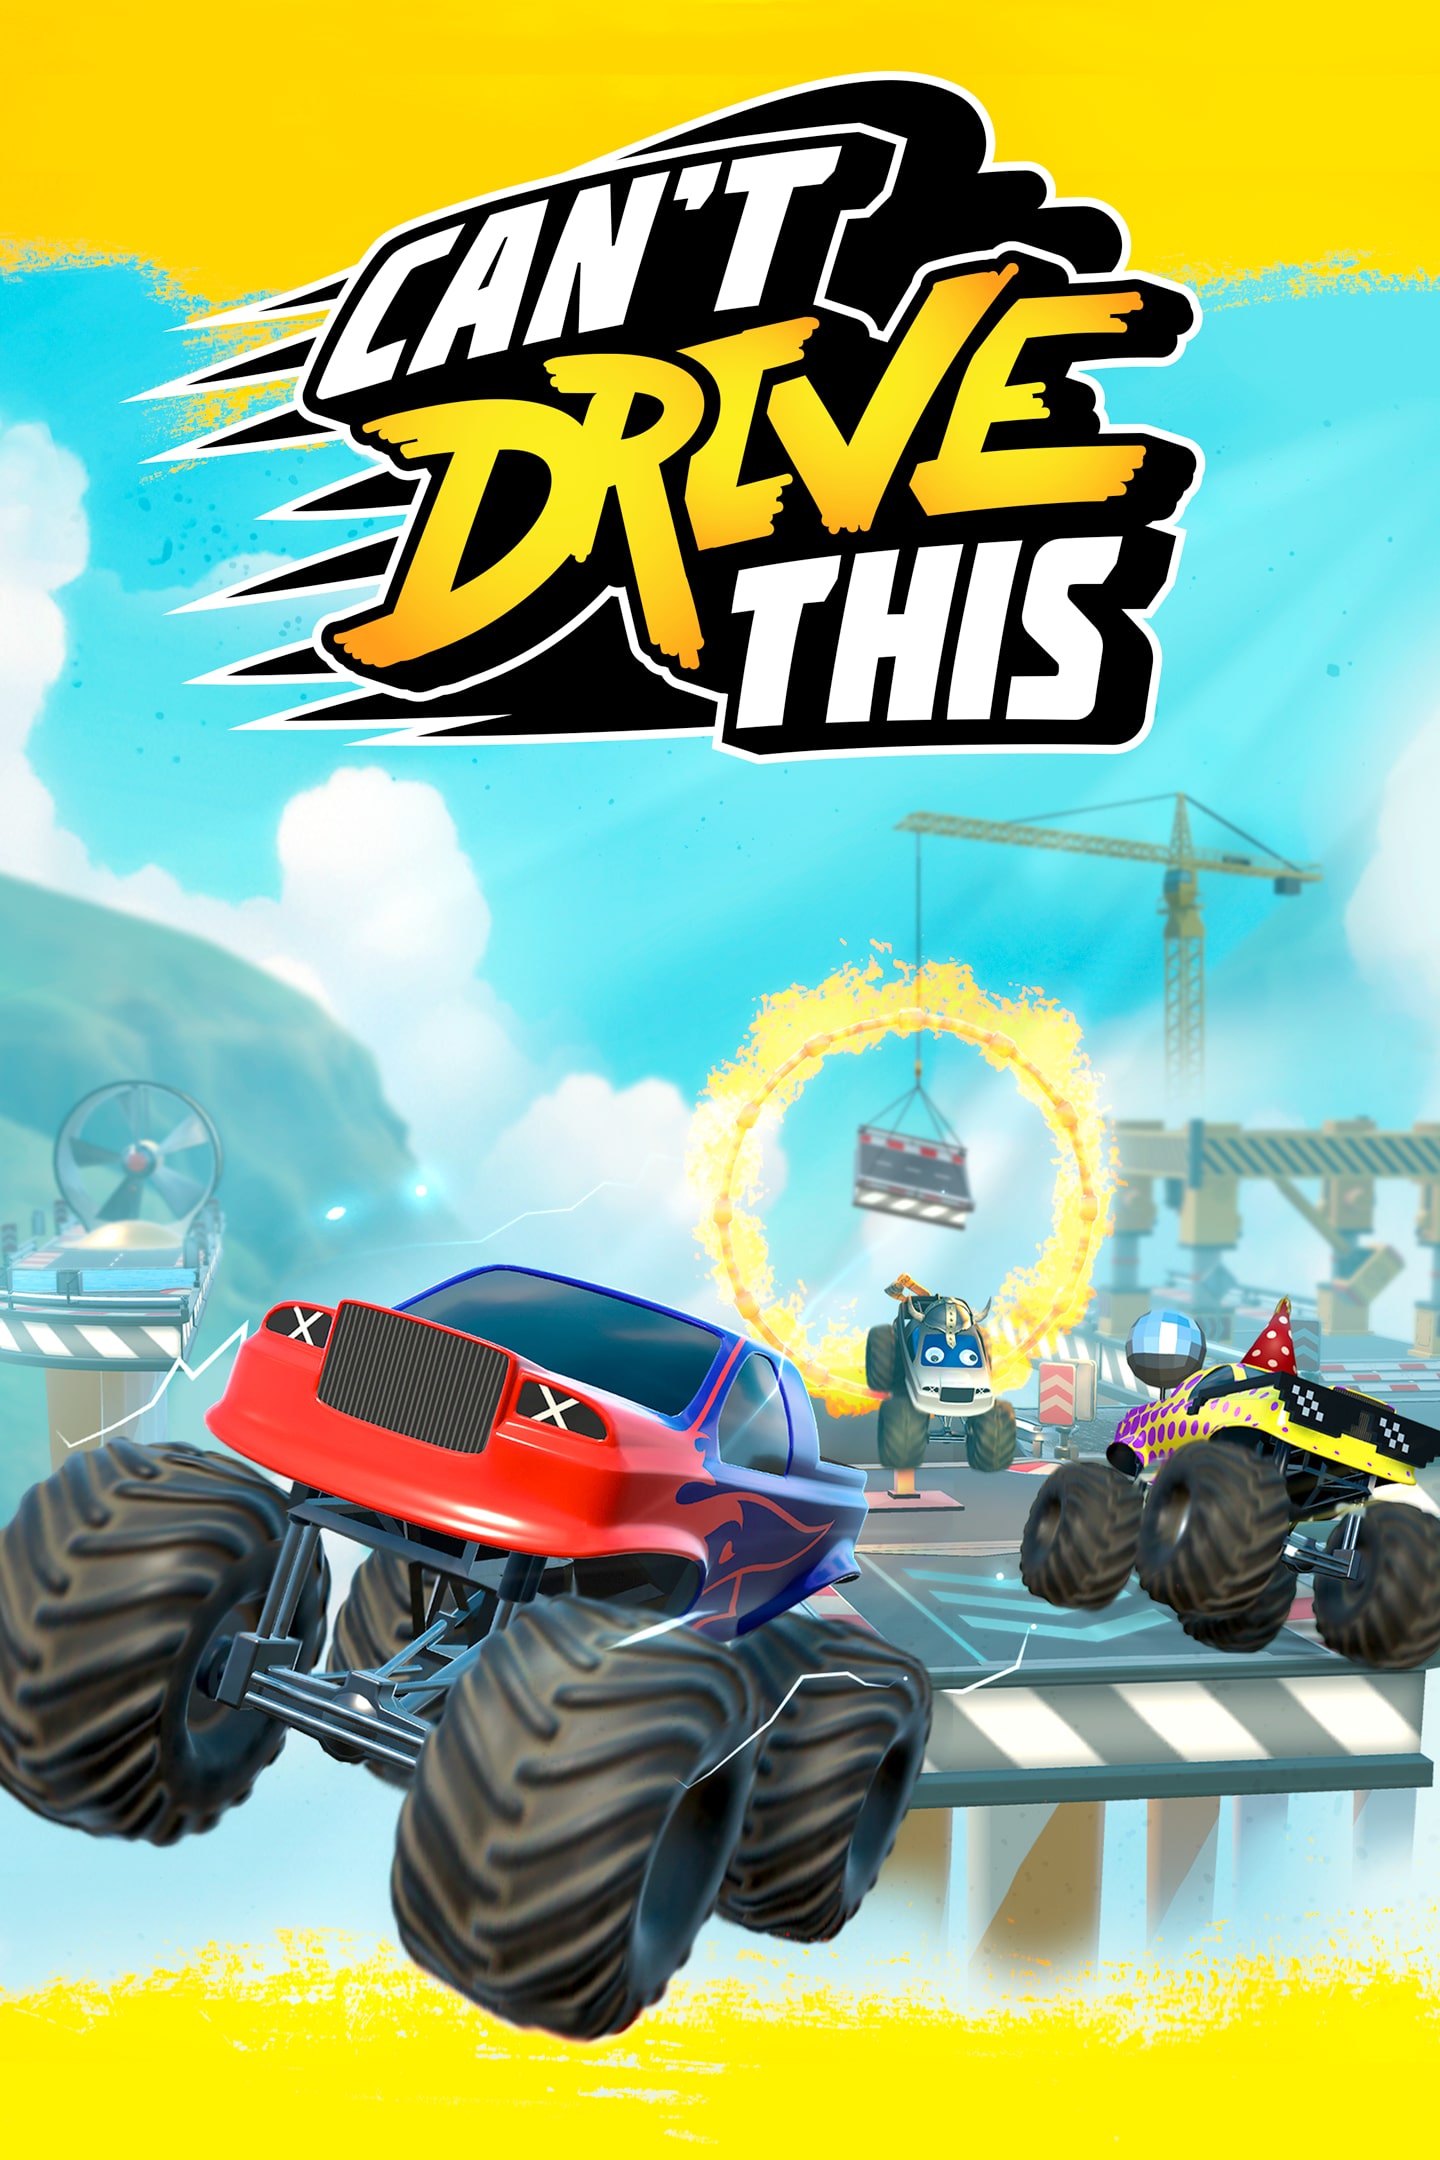 Can't Drive This (PS4)